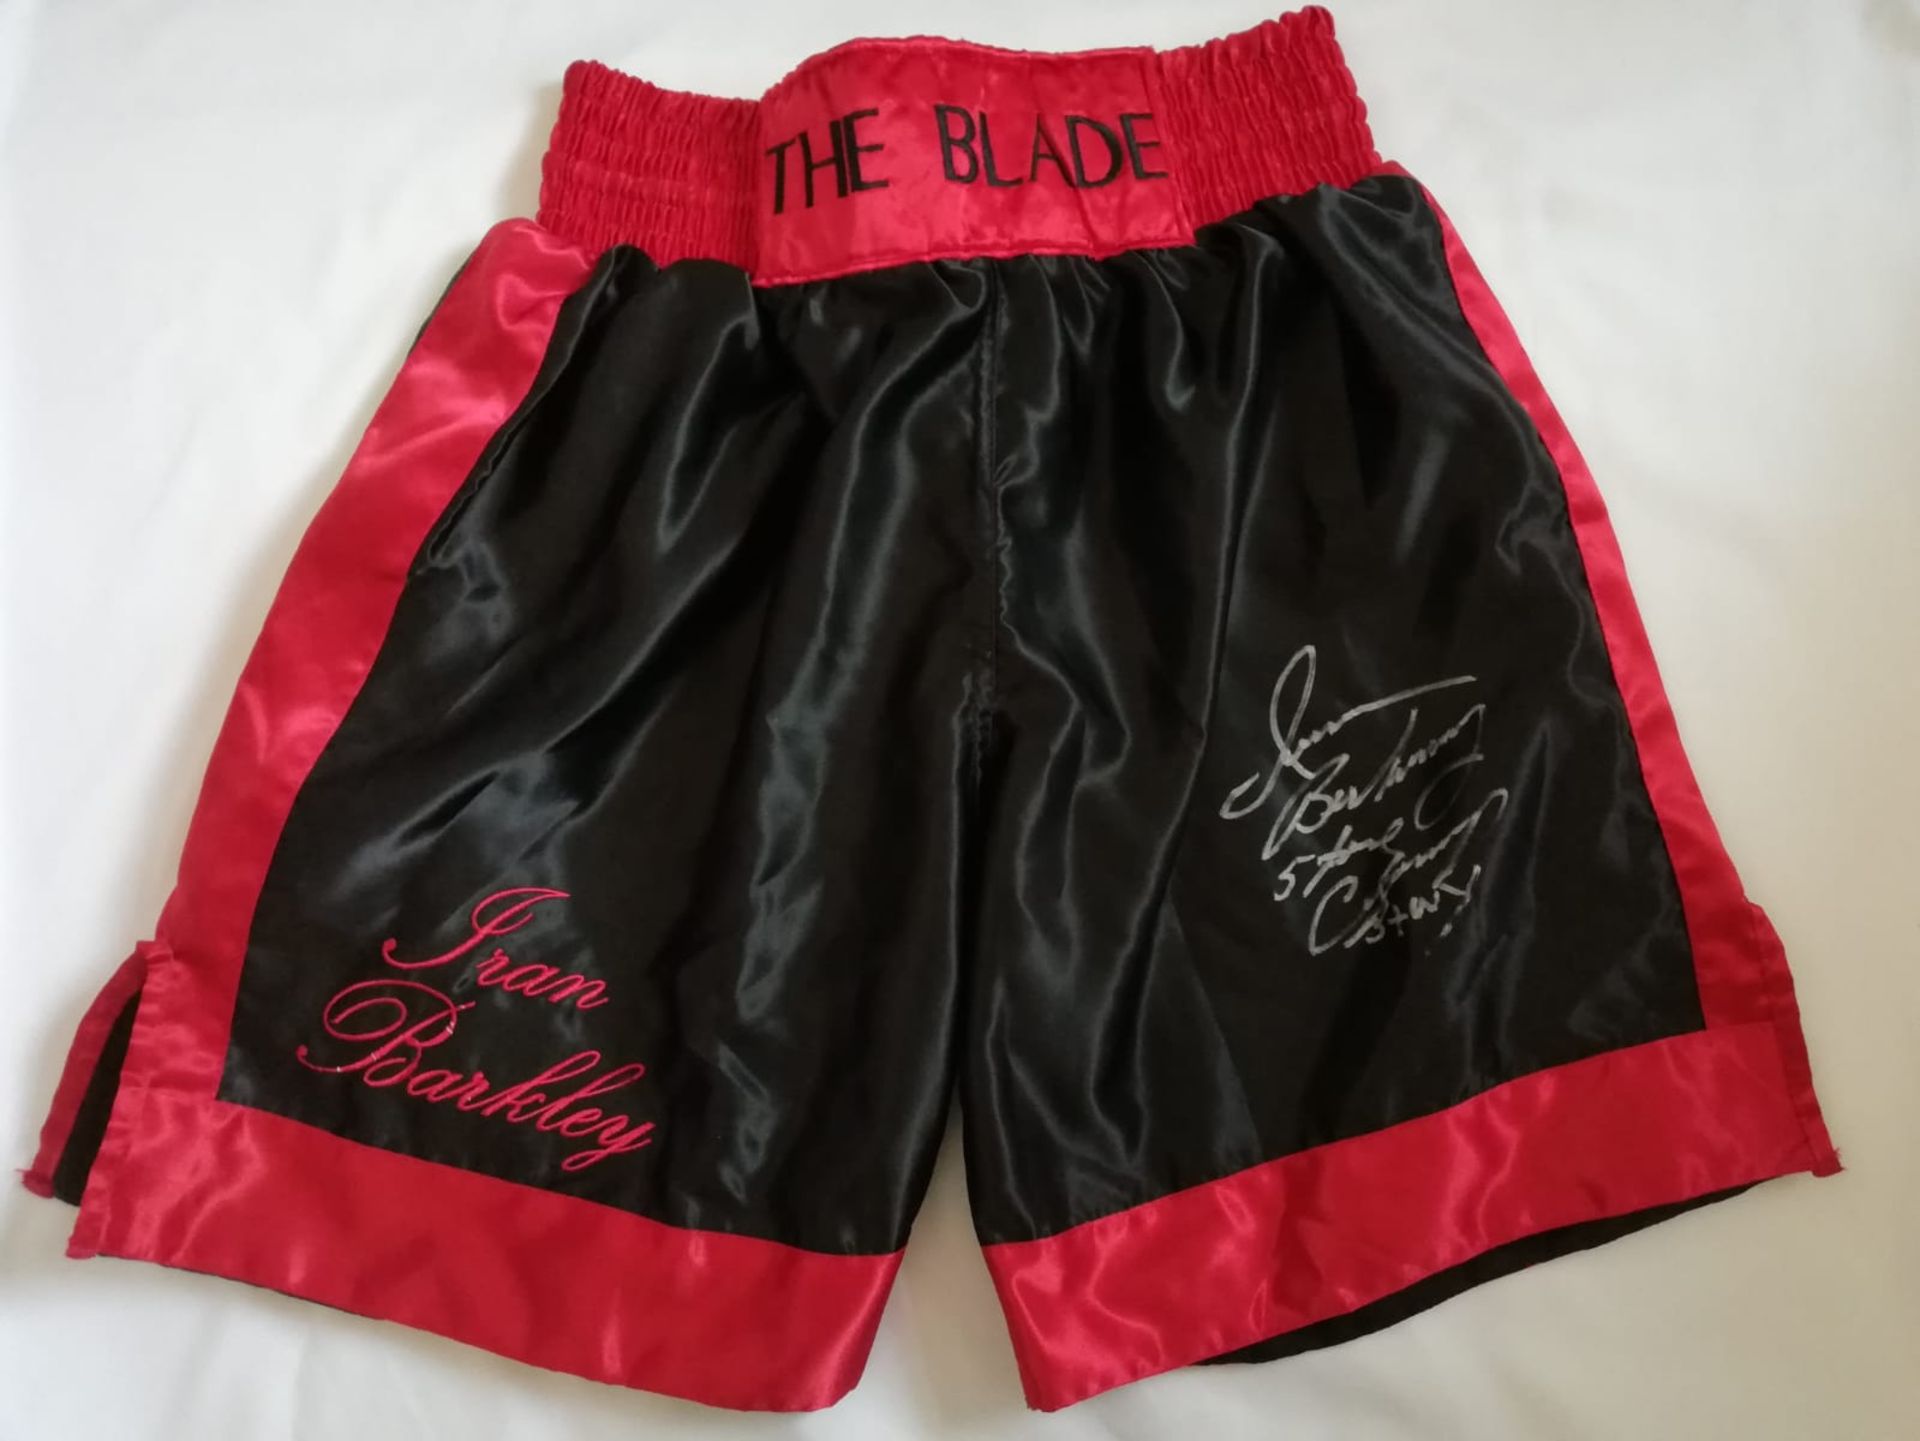 Iran Barkley Signed Boxing Shorts Supplied with Certificate Of Authenticity